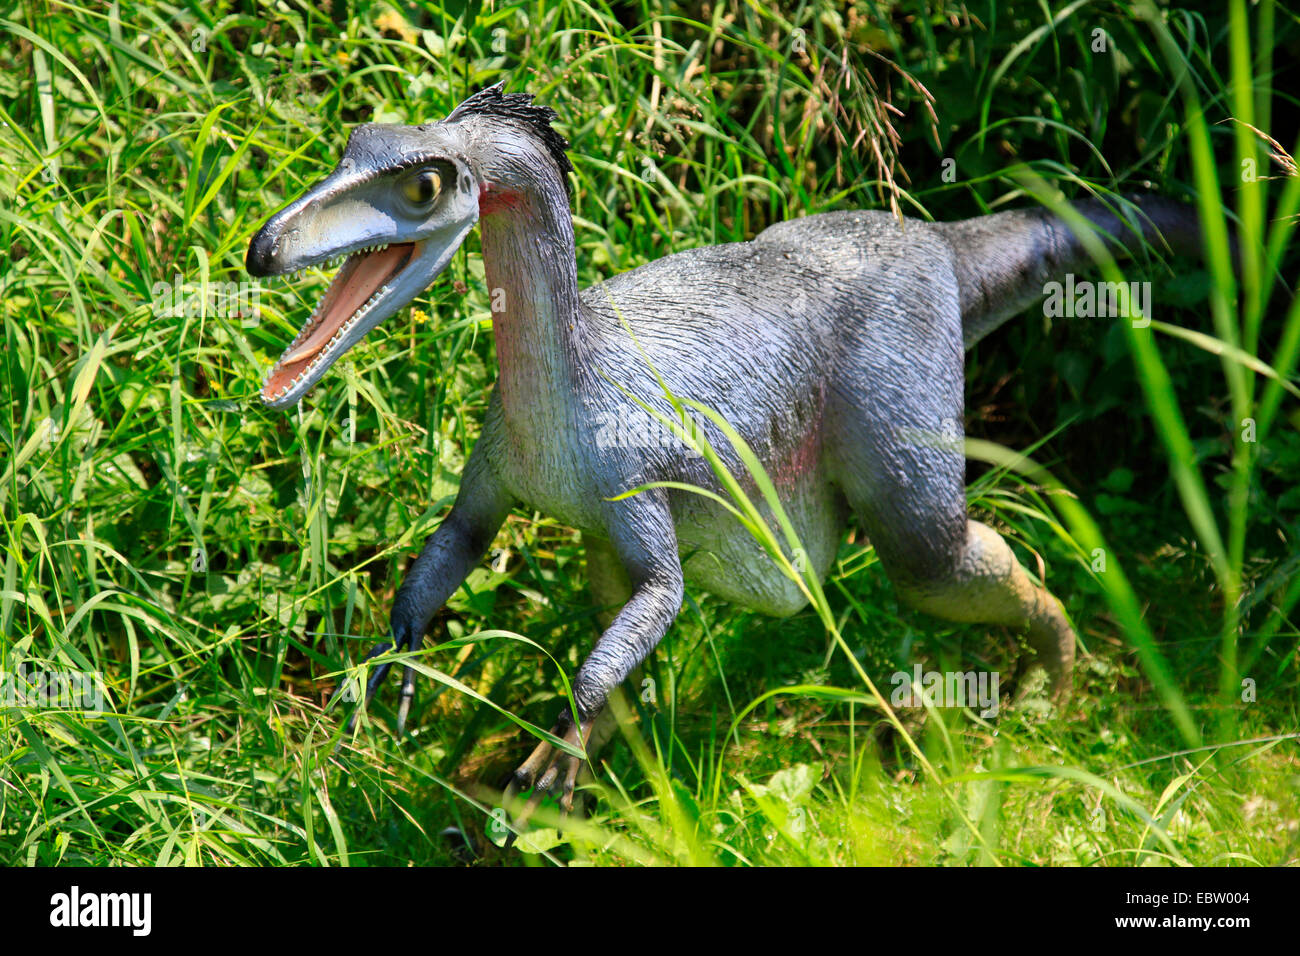 Hurting Tooth (Troodon), walking Stock Photo